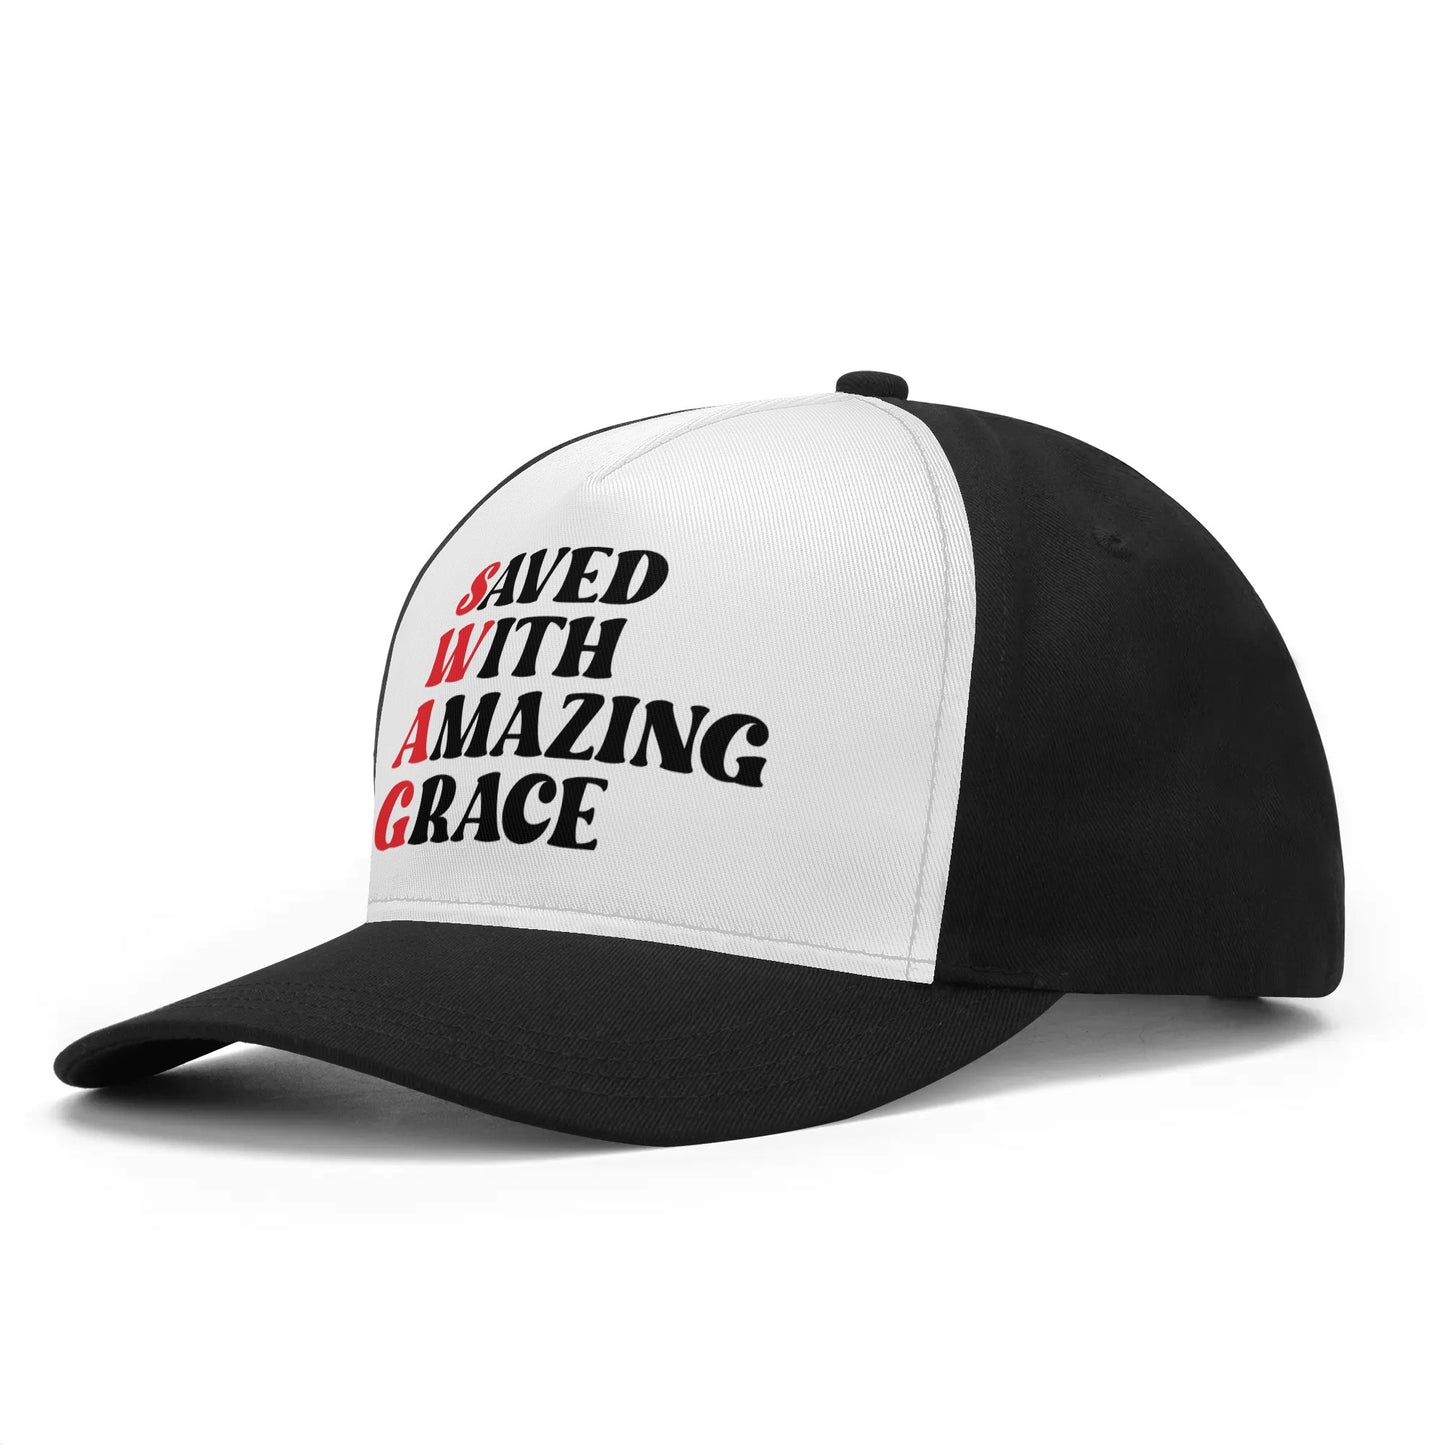 SWAG Saved With Amazing Grace Christian Hat